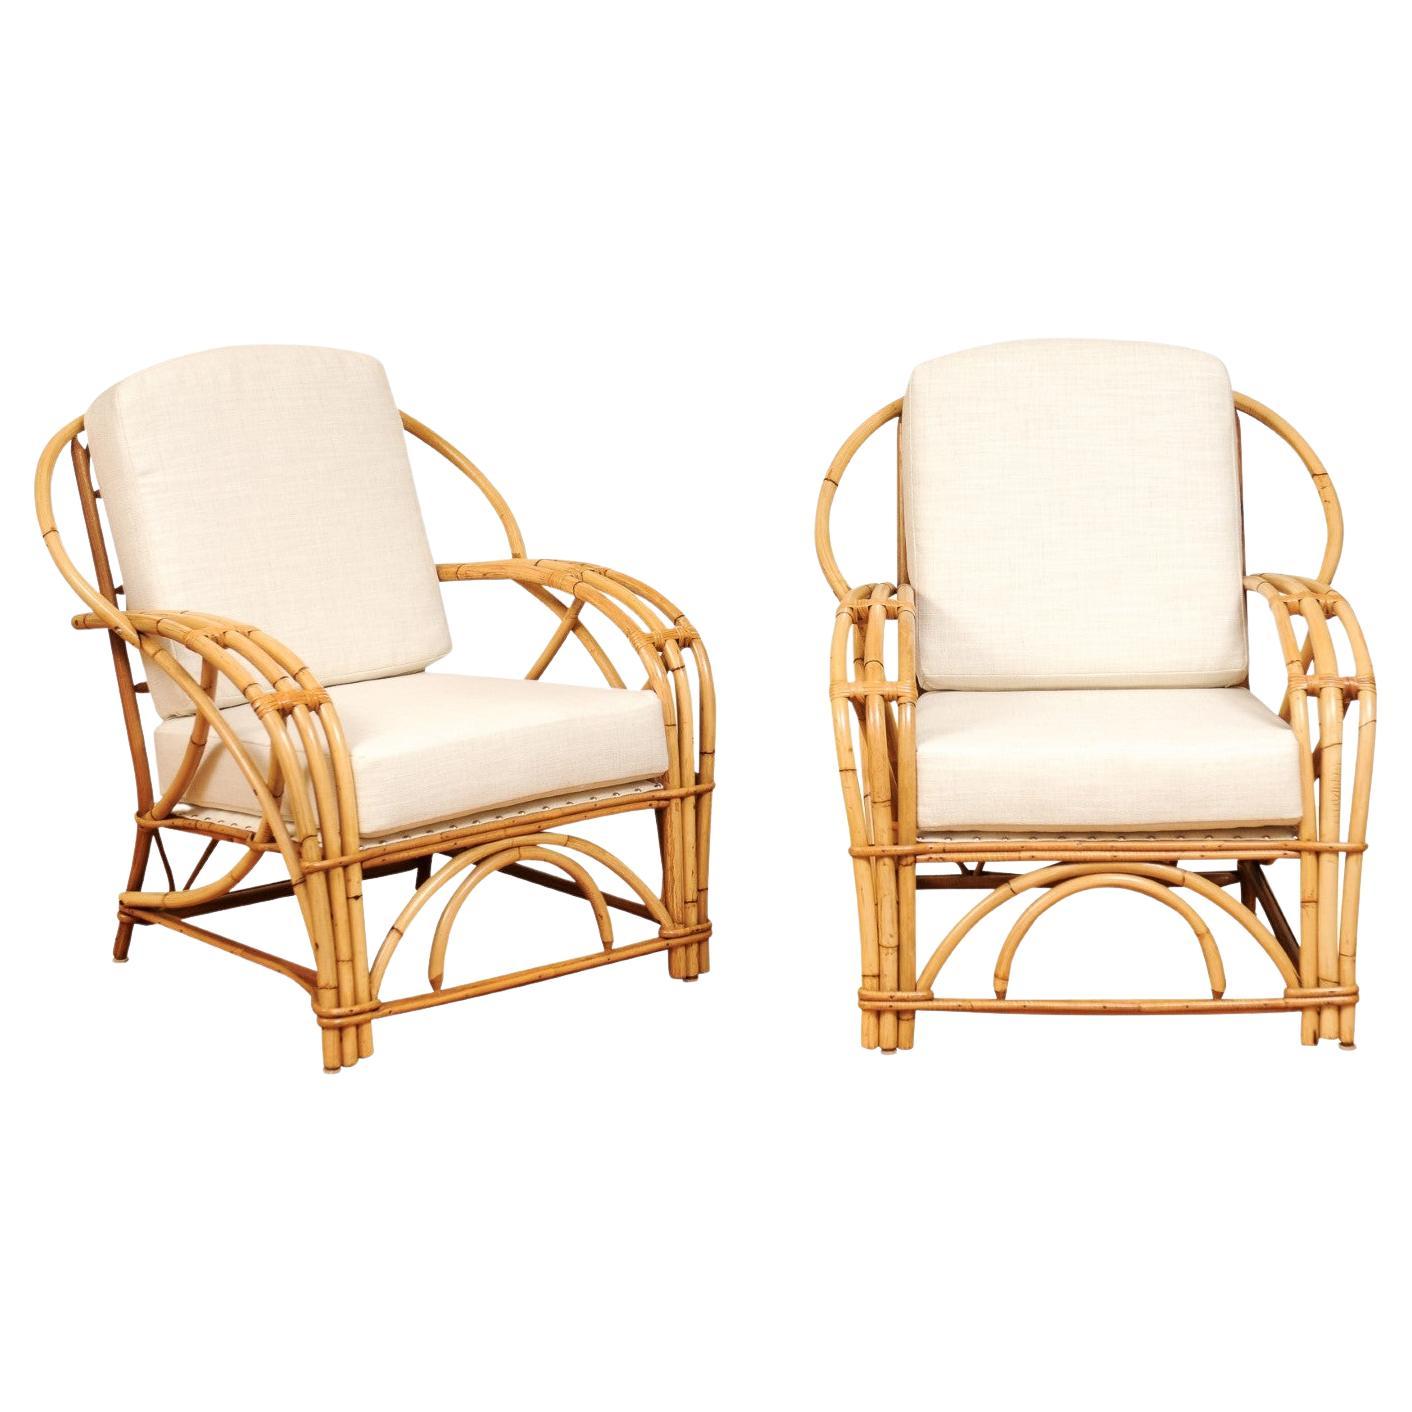 Exceptional Pair of Art Deco Rattan Loungers by Willow & Reed, circa 1945